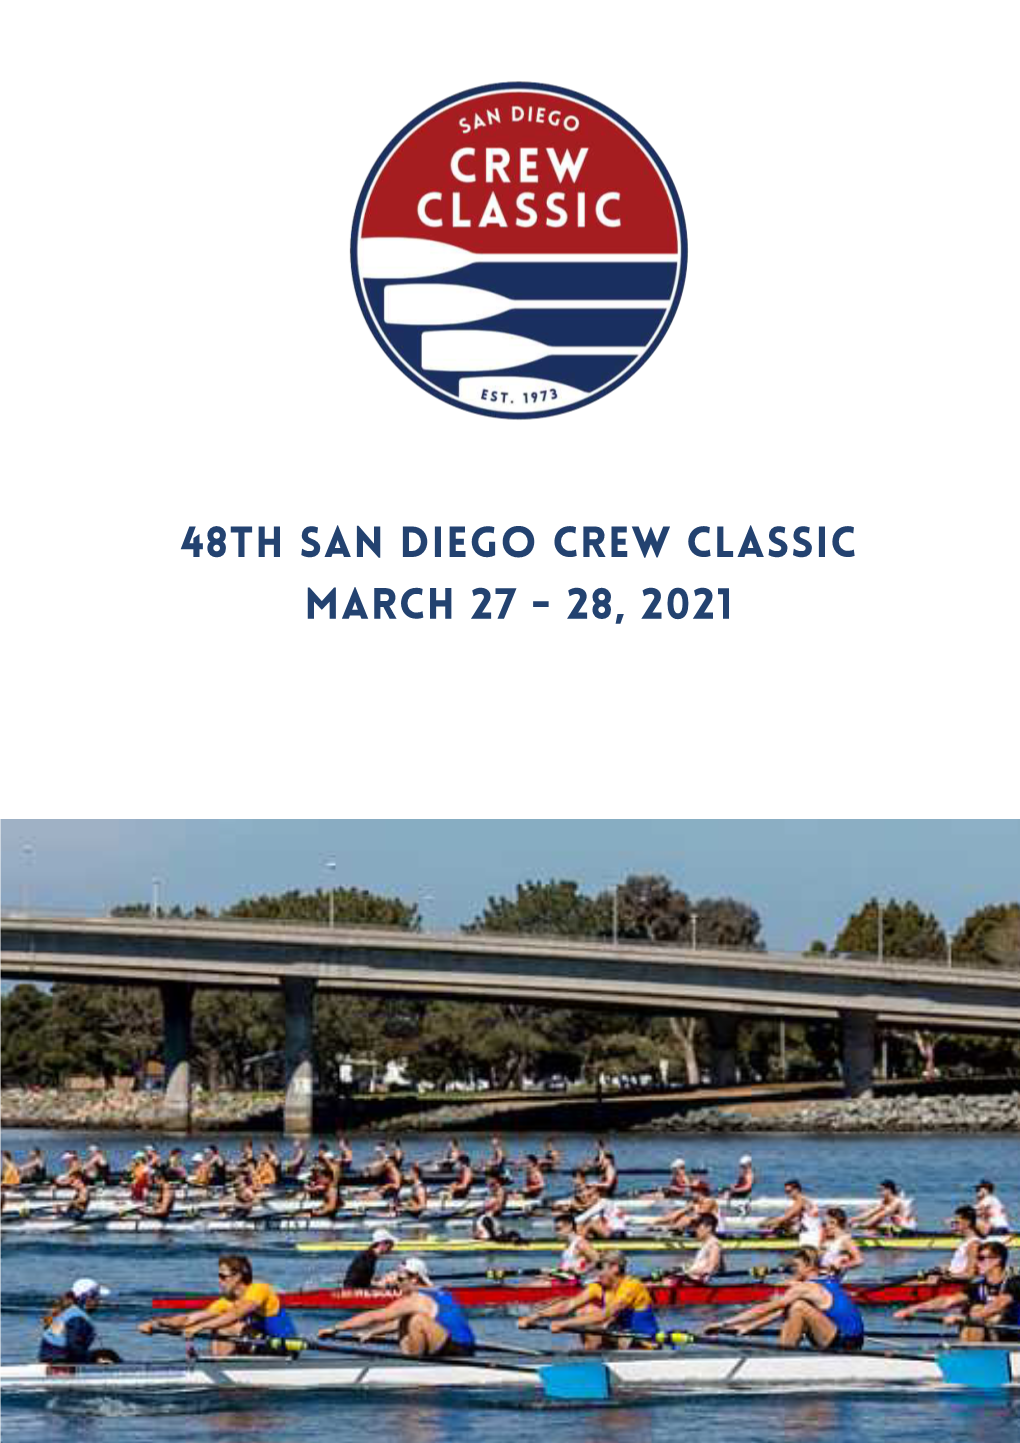 48Th San Diego Crew Classic March 27 - 28, 2021 the Crew Classic's the San Diego Crew Classic Influence Our Story the San Diego Crew Classic Is See